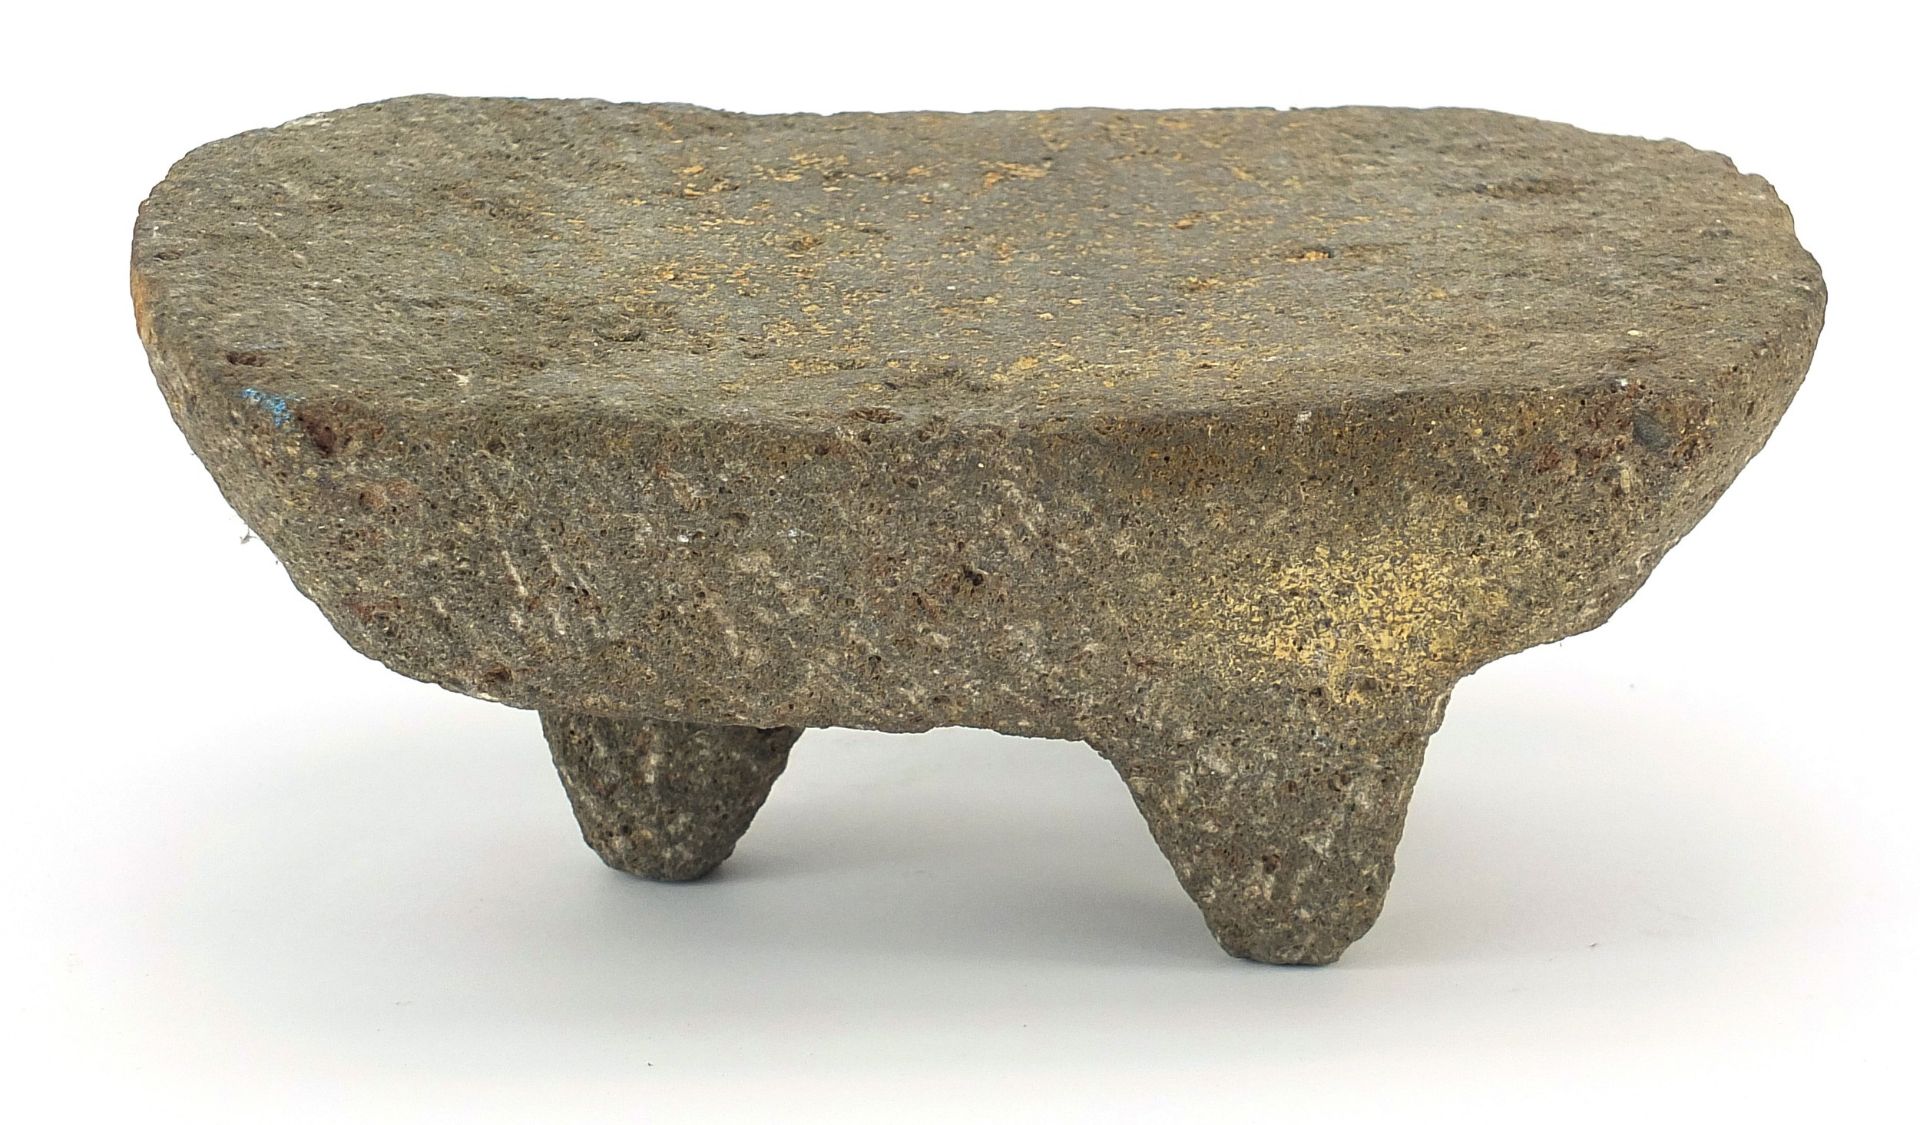 Antique stone three footed headrest, possibly Egpytian or Chinese, 9cm H x 21.5cm W x 14cm D